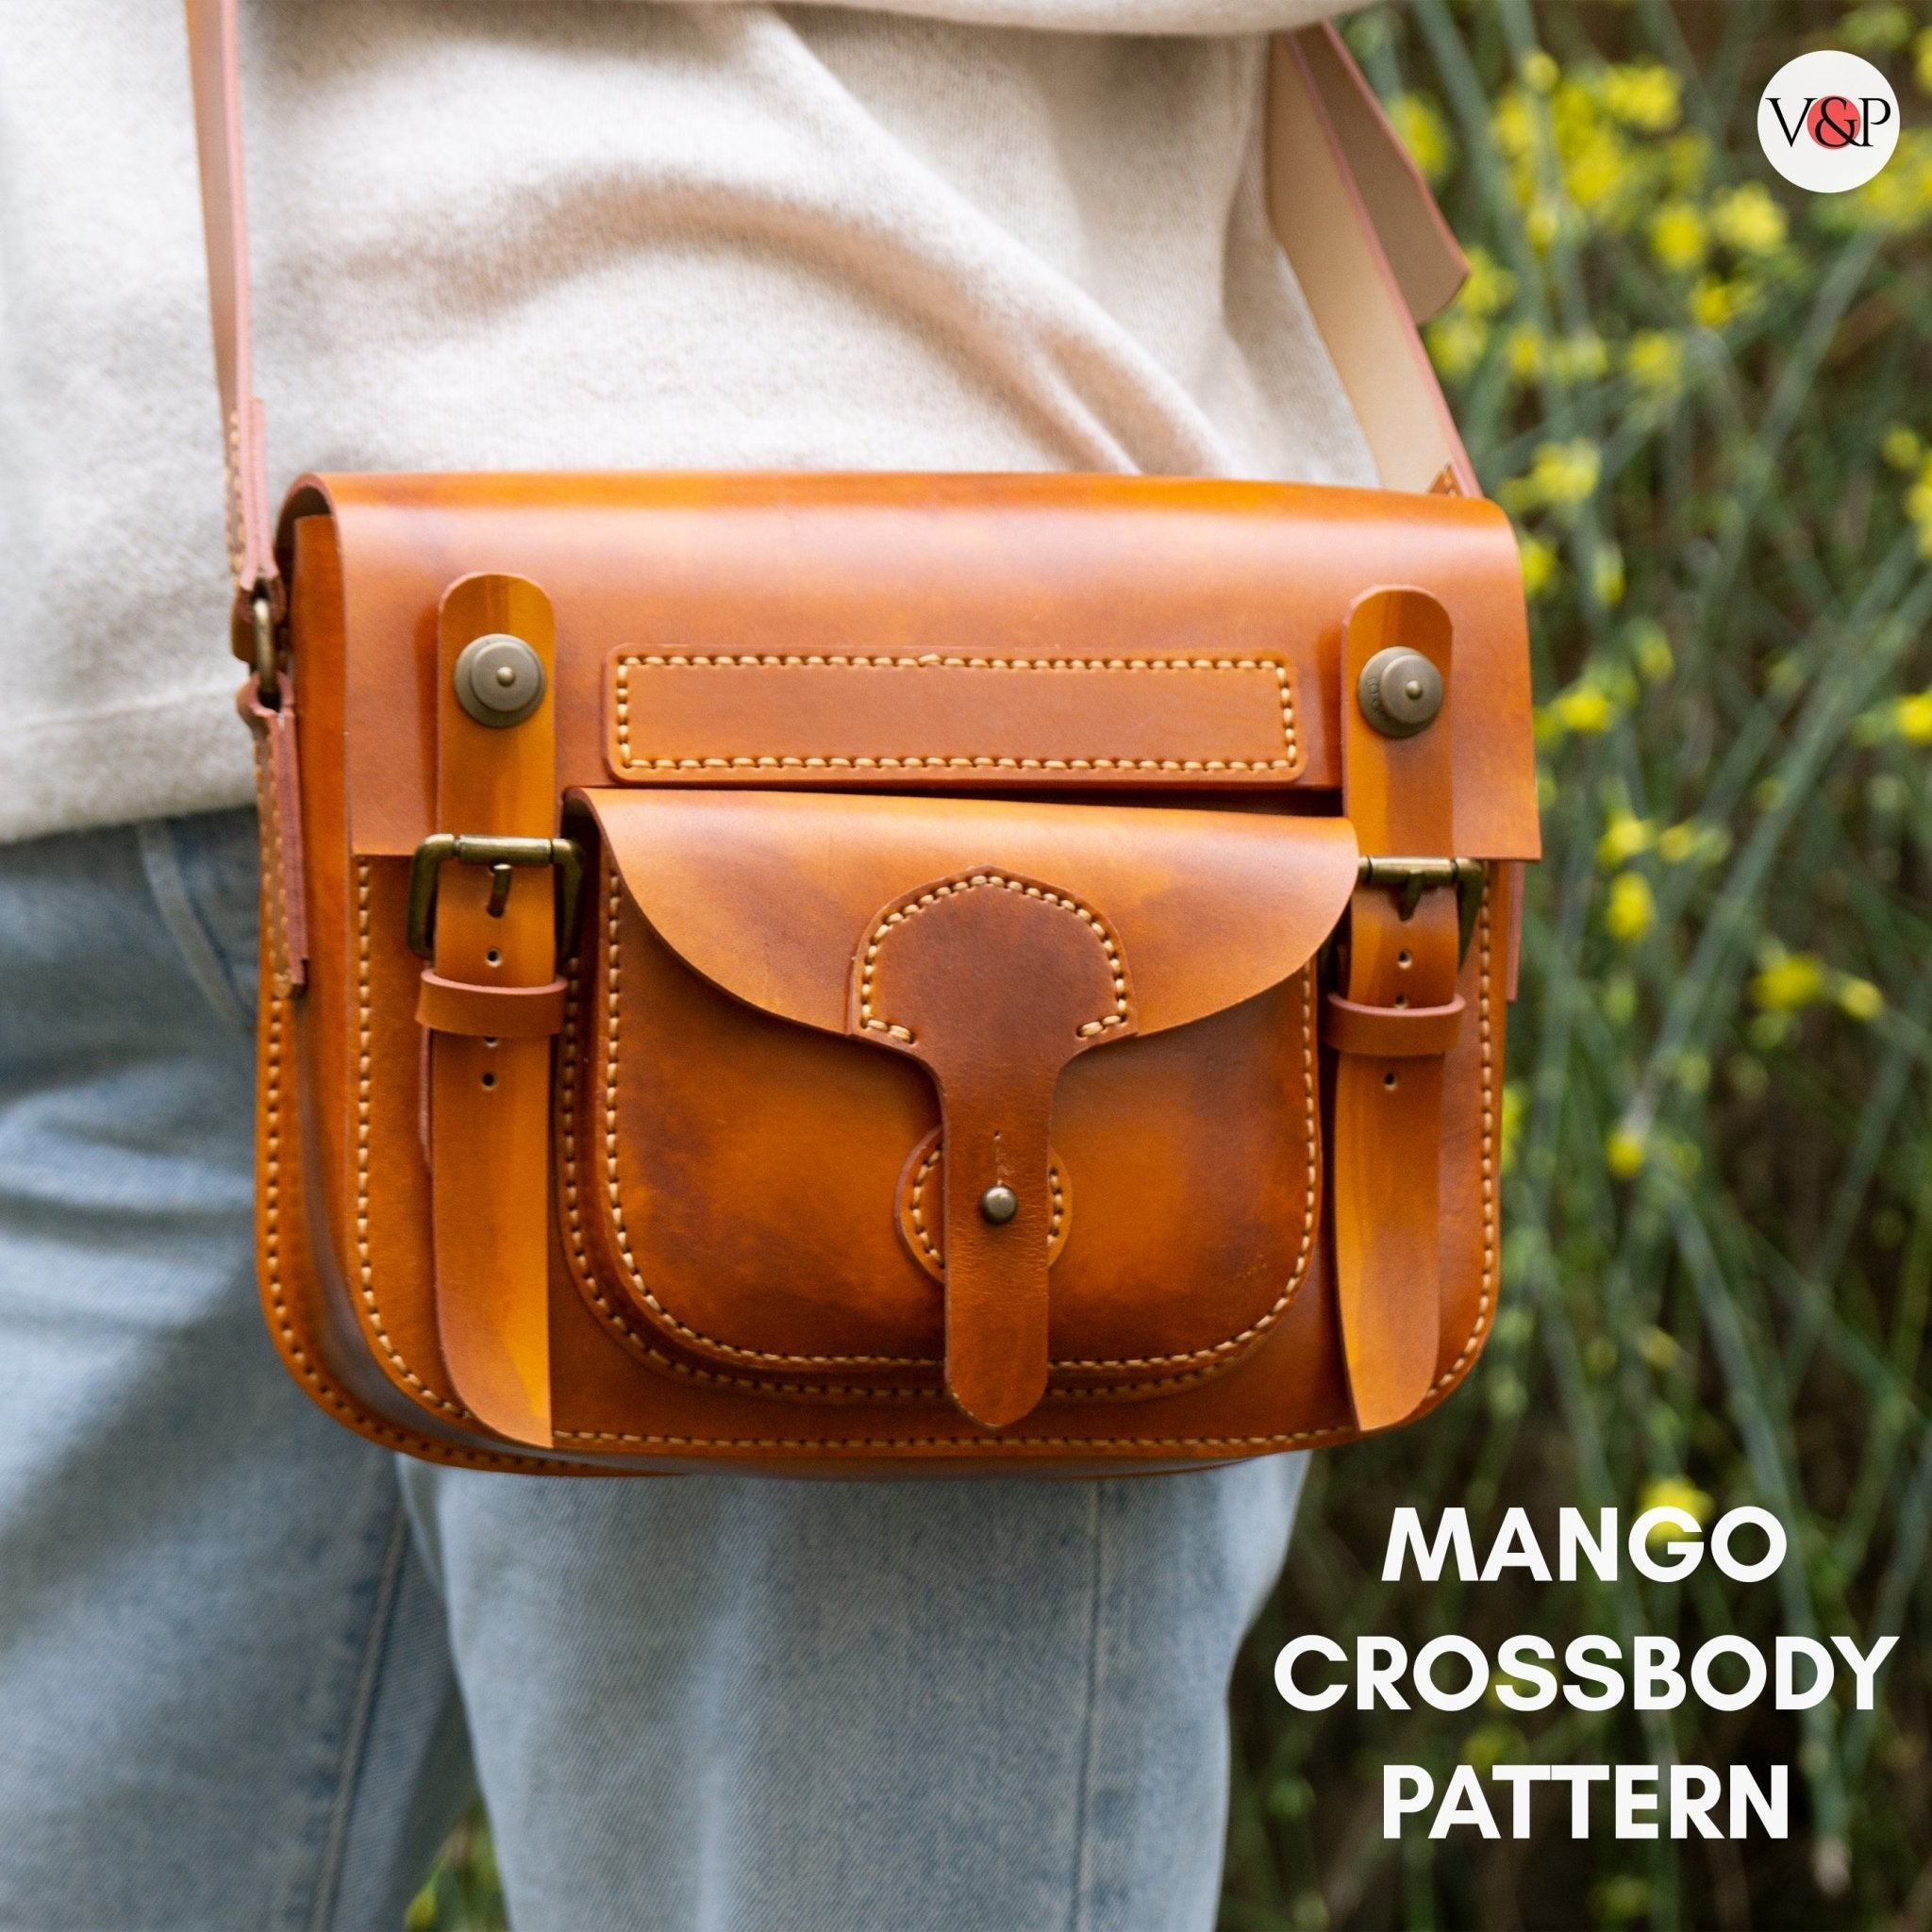 PDF Pattern Mango Crossbody Bag, Vector DXF for Laser Cut and Instructional Video by Vasile and Pavel - Vasile and Pavel Leather Patterns